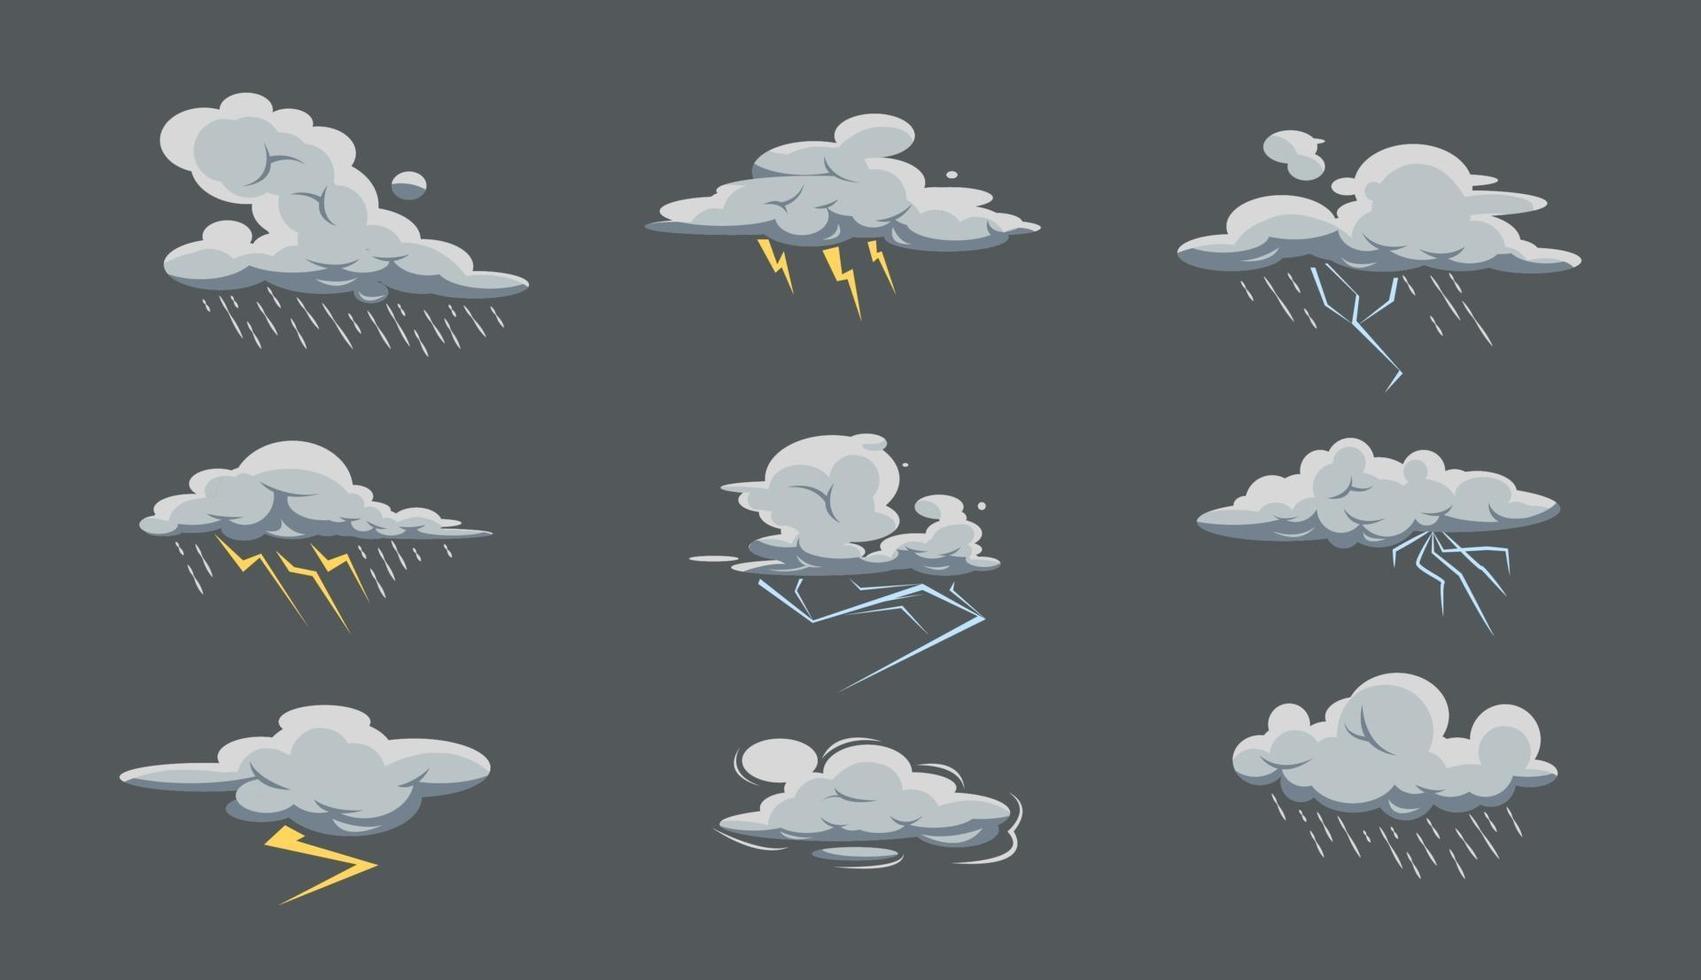 Storm cloud big set with rain and thunderstorm in cartoon style. Bad weather icon collection. Sky with rain vector